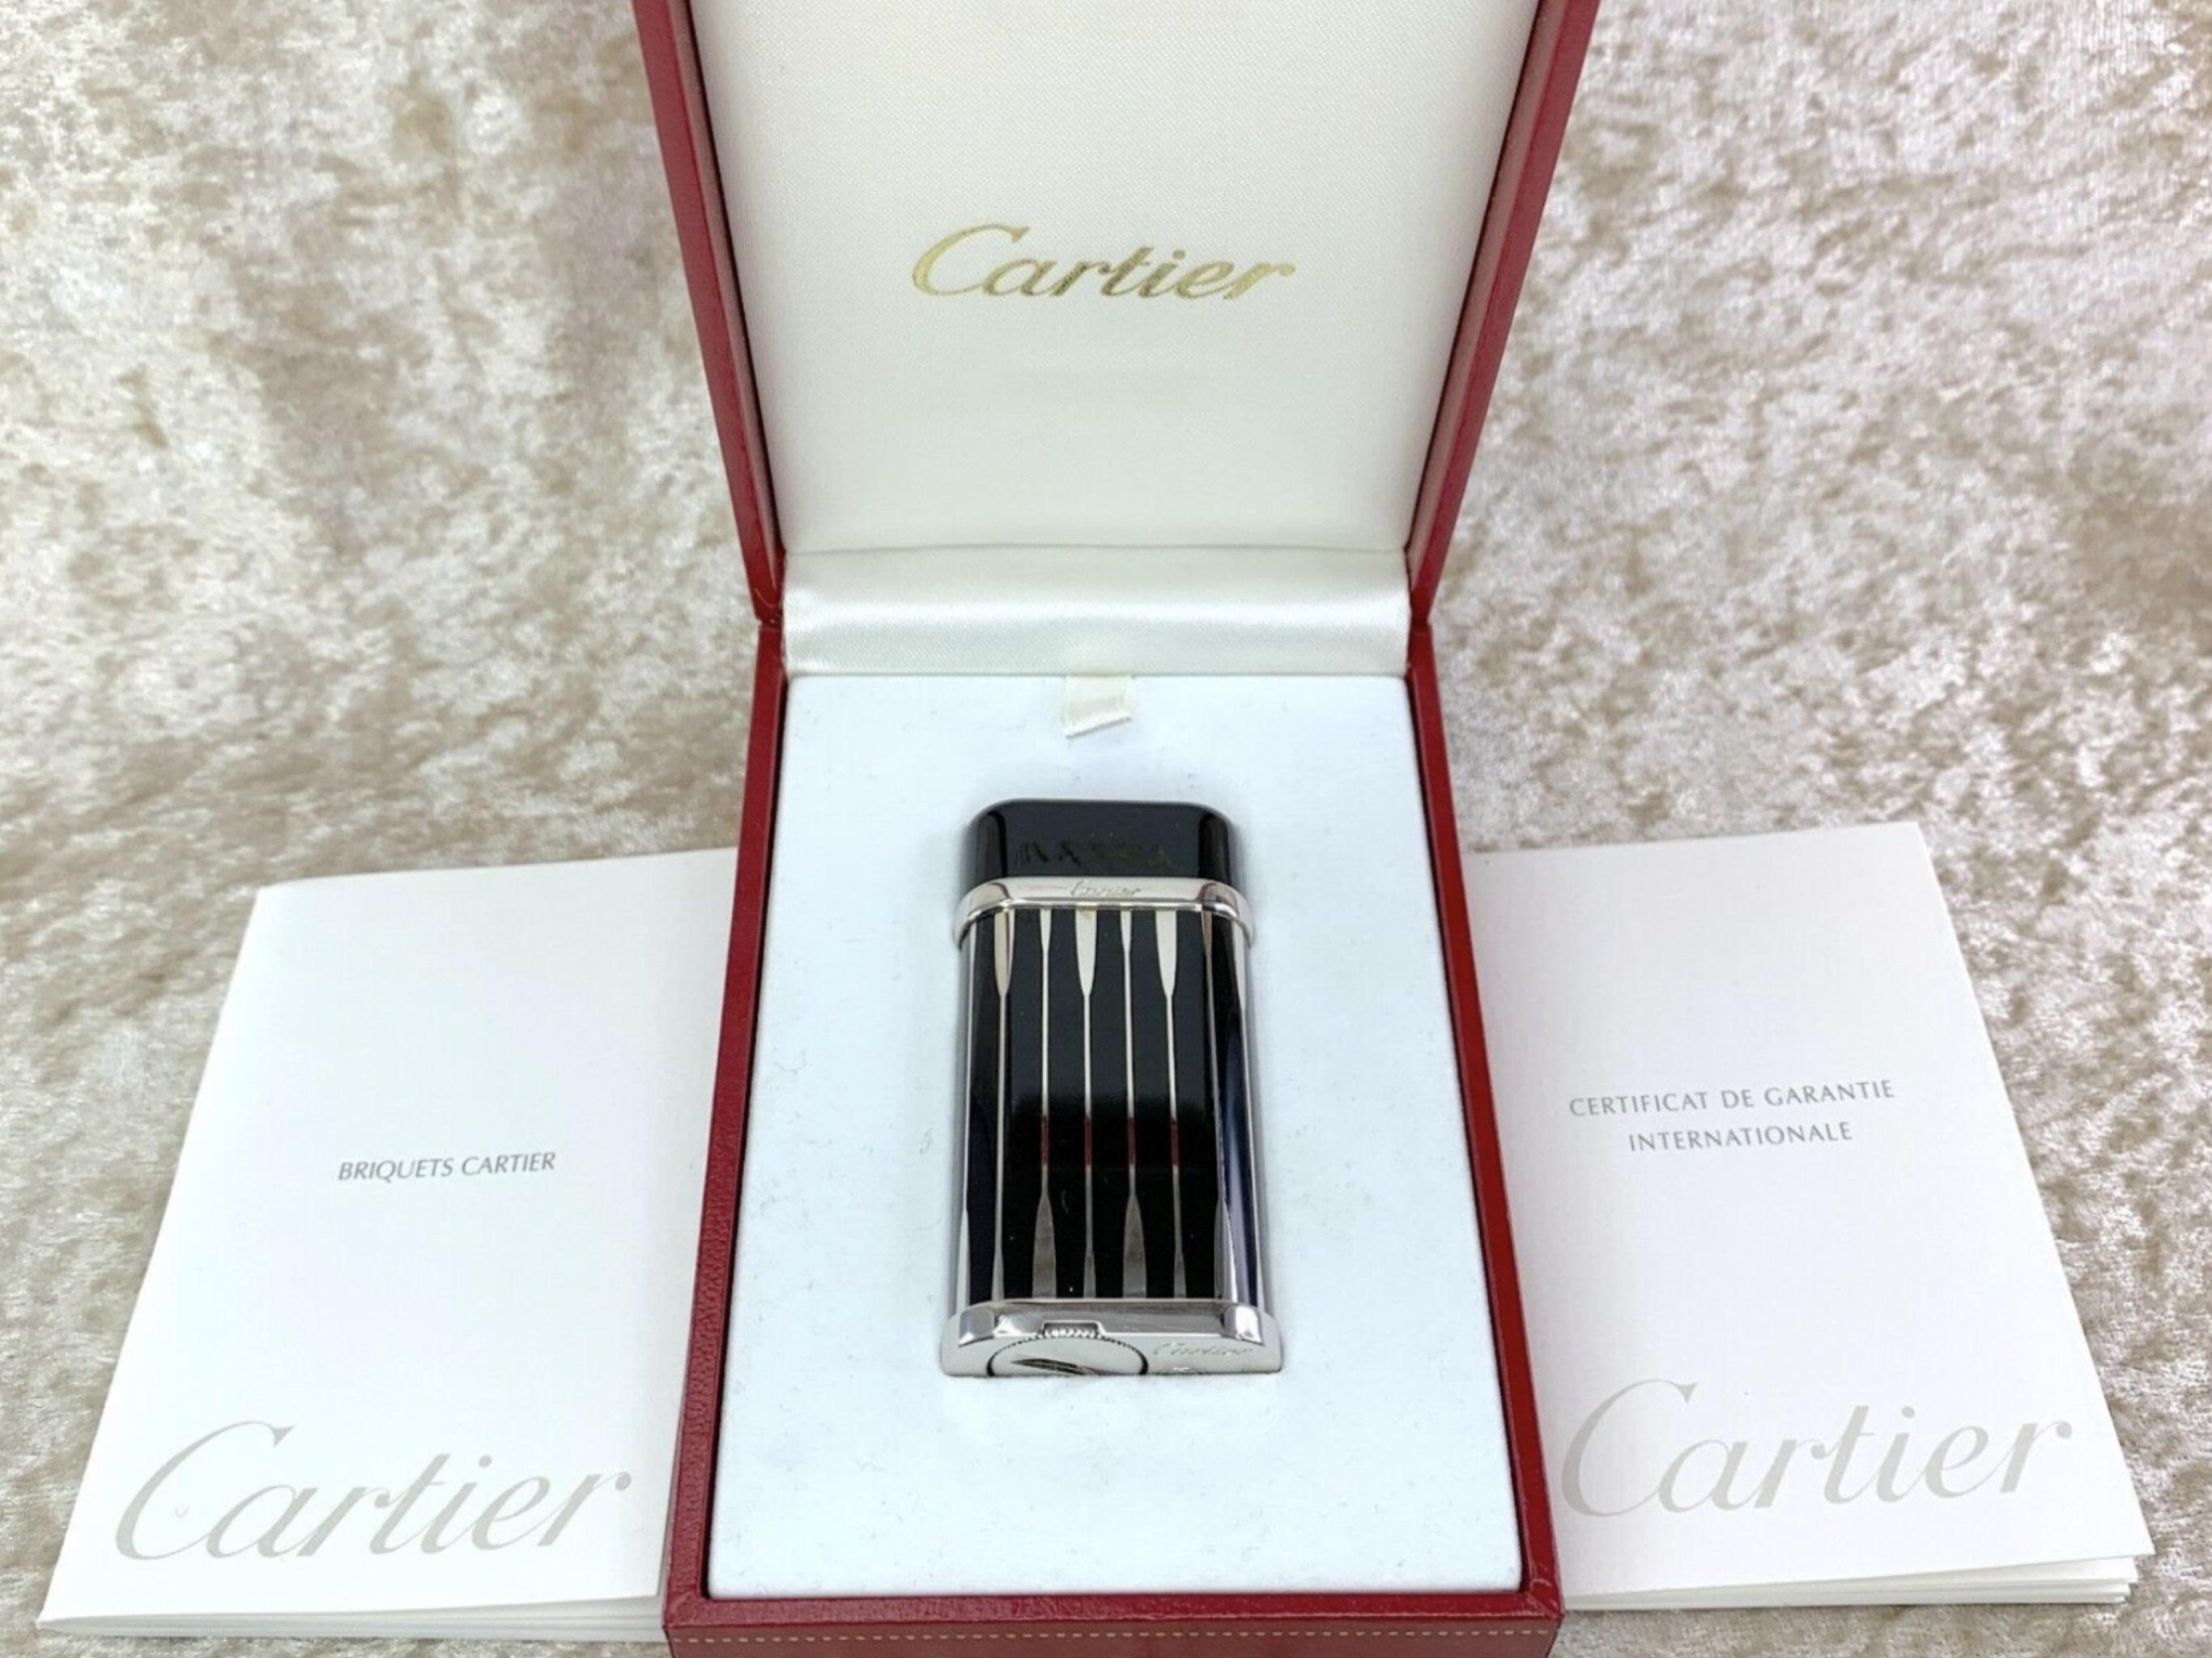 Cartier Lighter - Very Rare Backgammon 
Black and Silver
Original Cartier Case and Cartier Certificate
Oval shape 
60 x 30 x 12 mm
Year - 2011
The lighter is in excellent condition
Has all original parts 
Ignites, sparks and flames 

